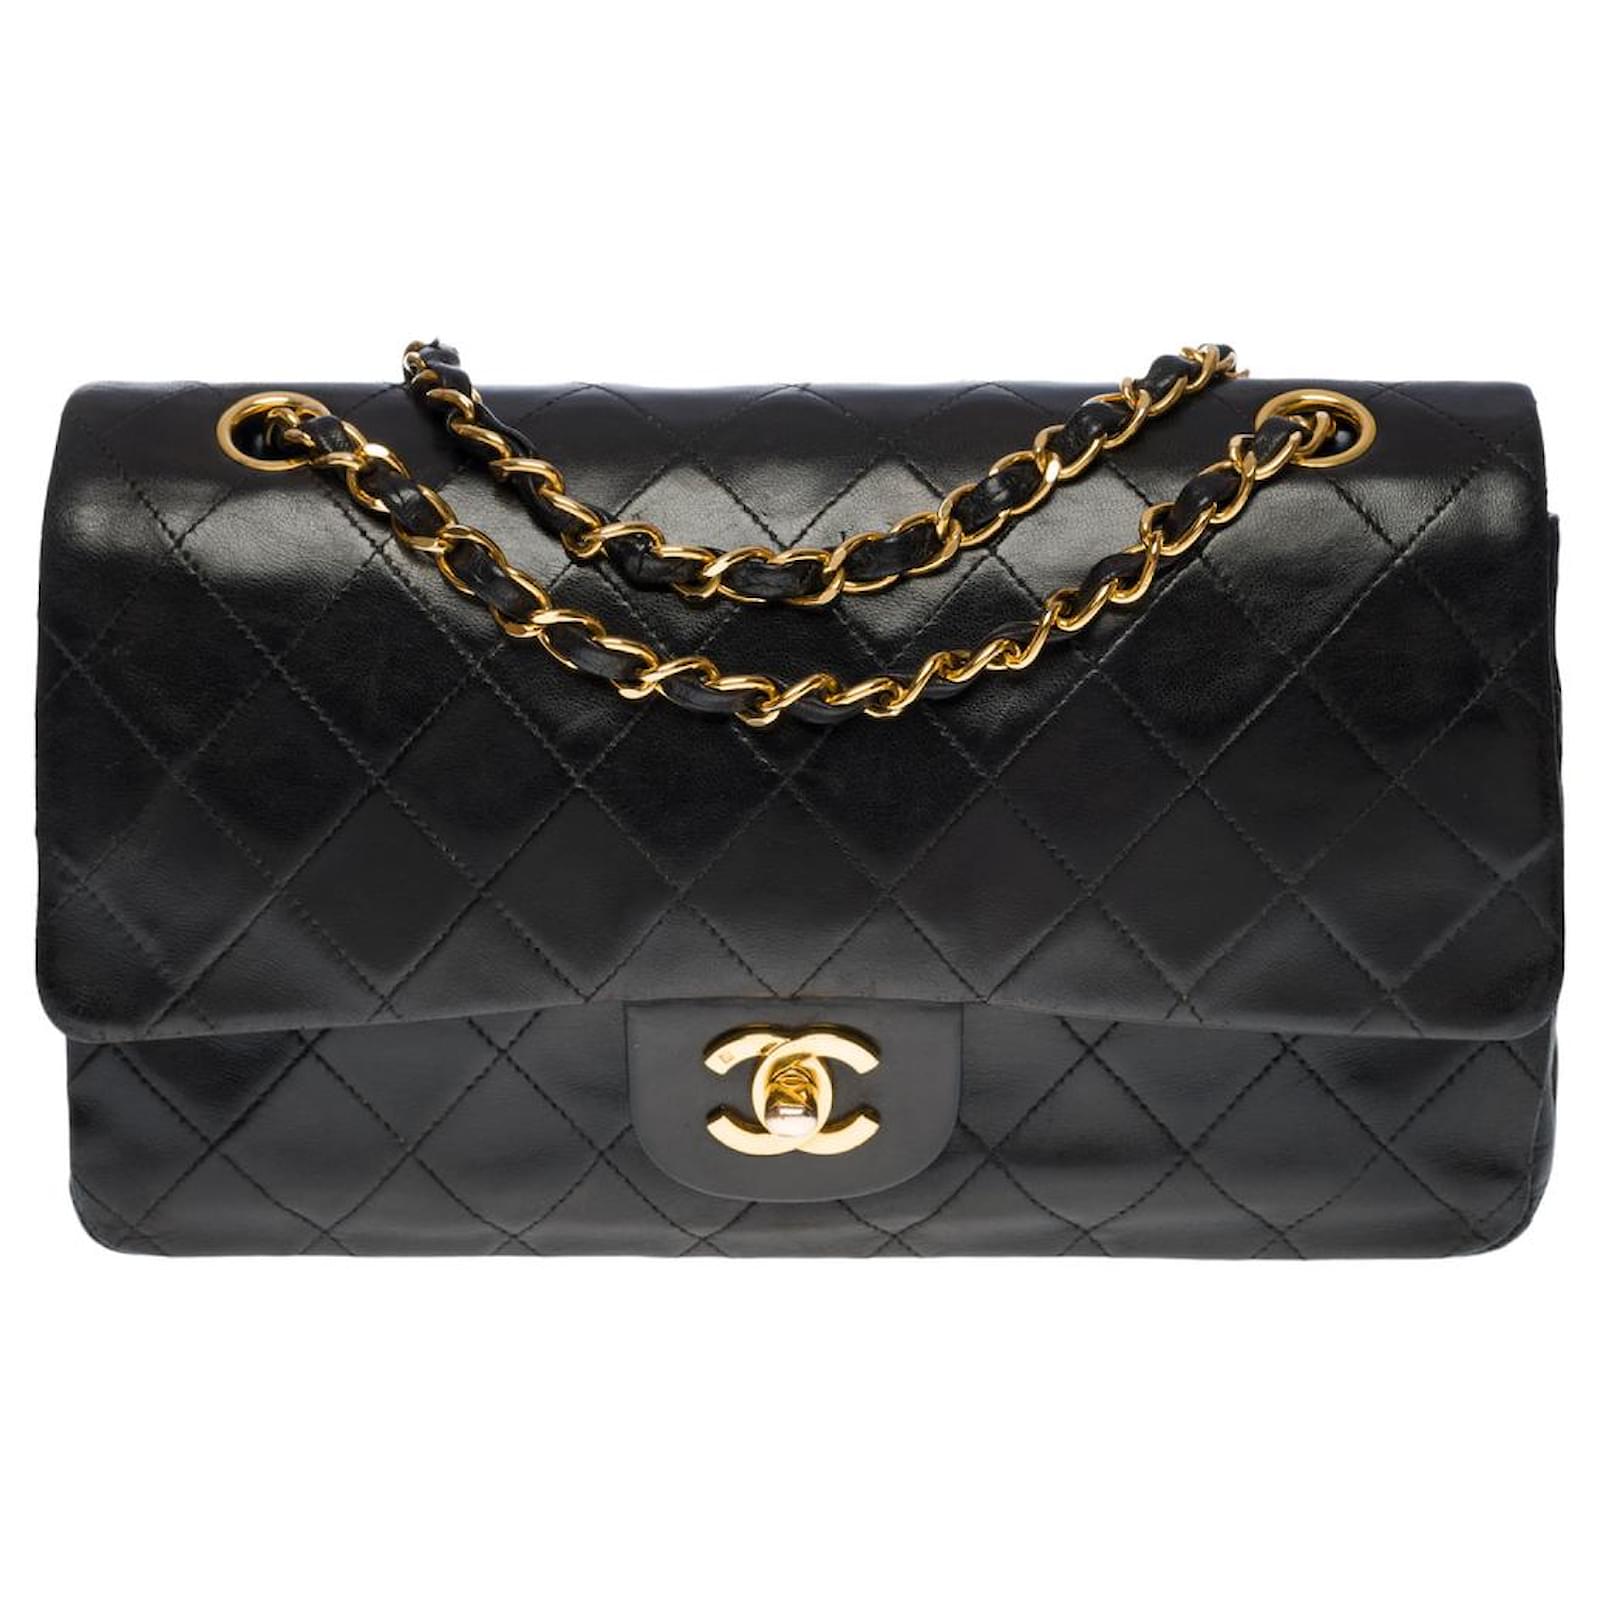 CHANEL TIMELESS MEDIUM lined FLAP CROSSBODY BAG IN BLACK QUILTED